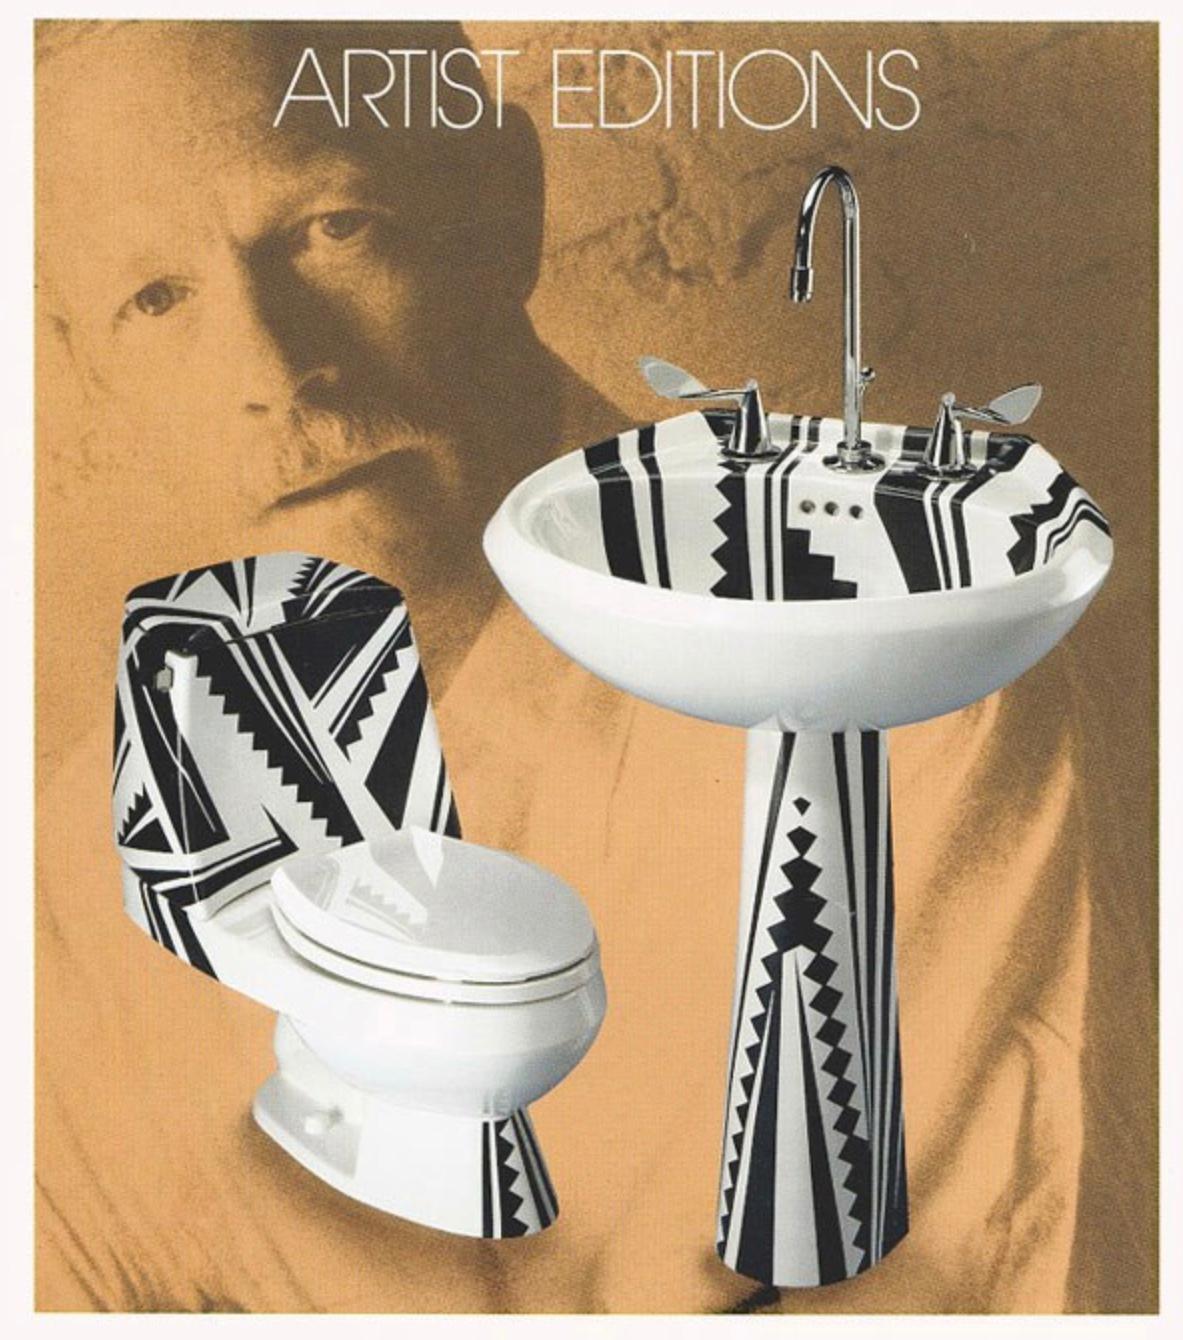 Art Nelson for Kohler artist's edition cactus cutter pedestal sink, 1986. Extremely rare piece by ceramics icon Art Nelson, limited production in 1986 for Kohler Artist's Edition. Graphic geometric pattern, all original hardware including faucet and